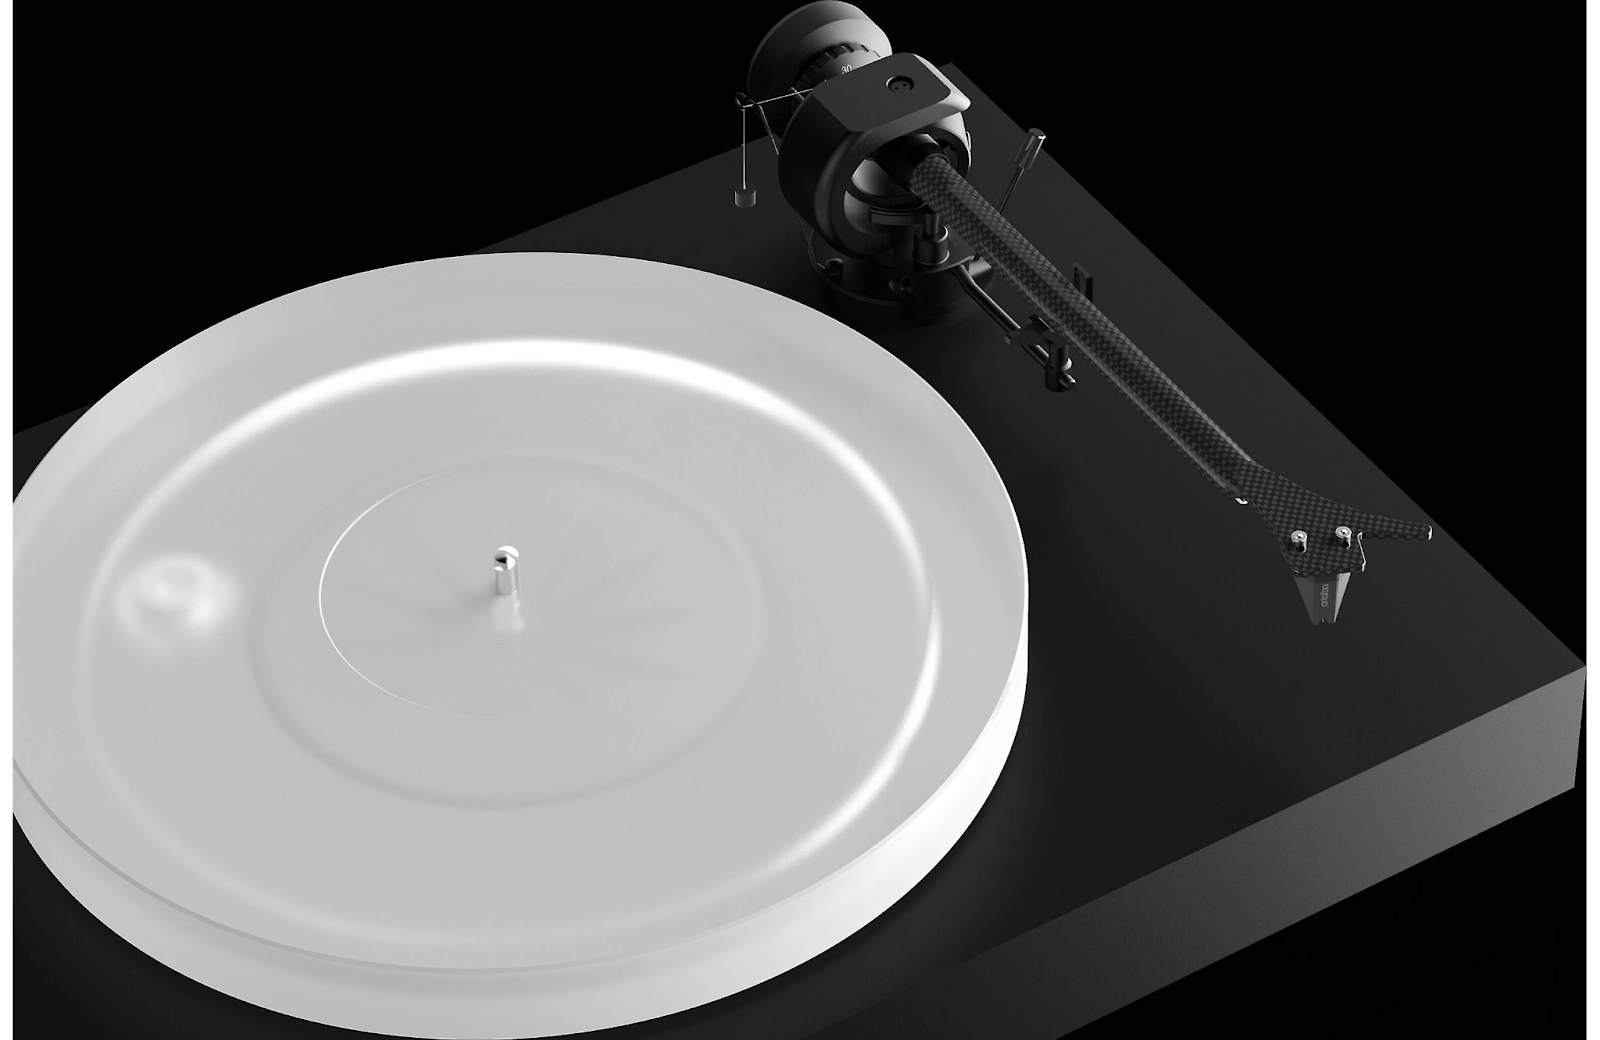 Pro-Ject X2 Manual belt-drive turntable with pre-mounted cartridge (Satin Black)